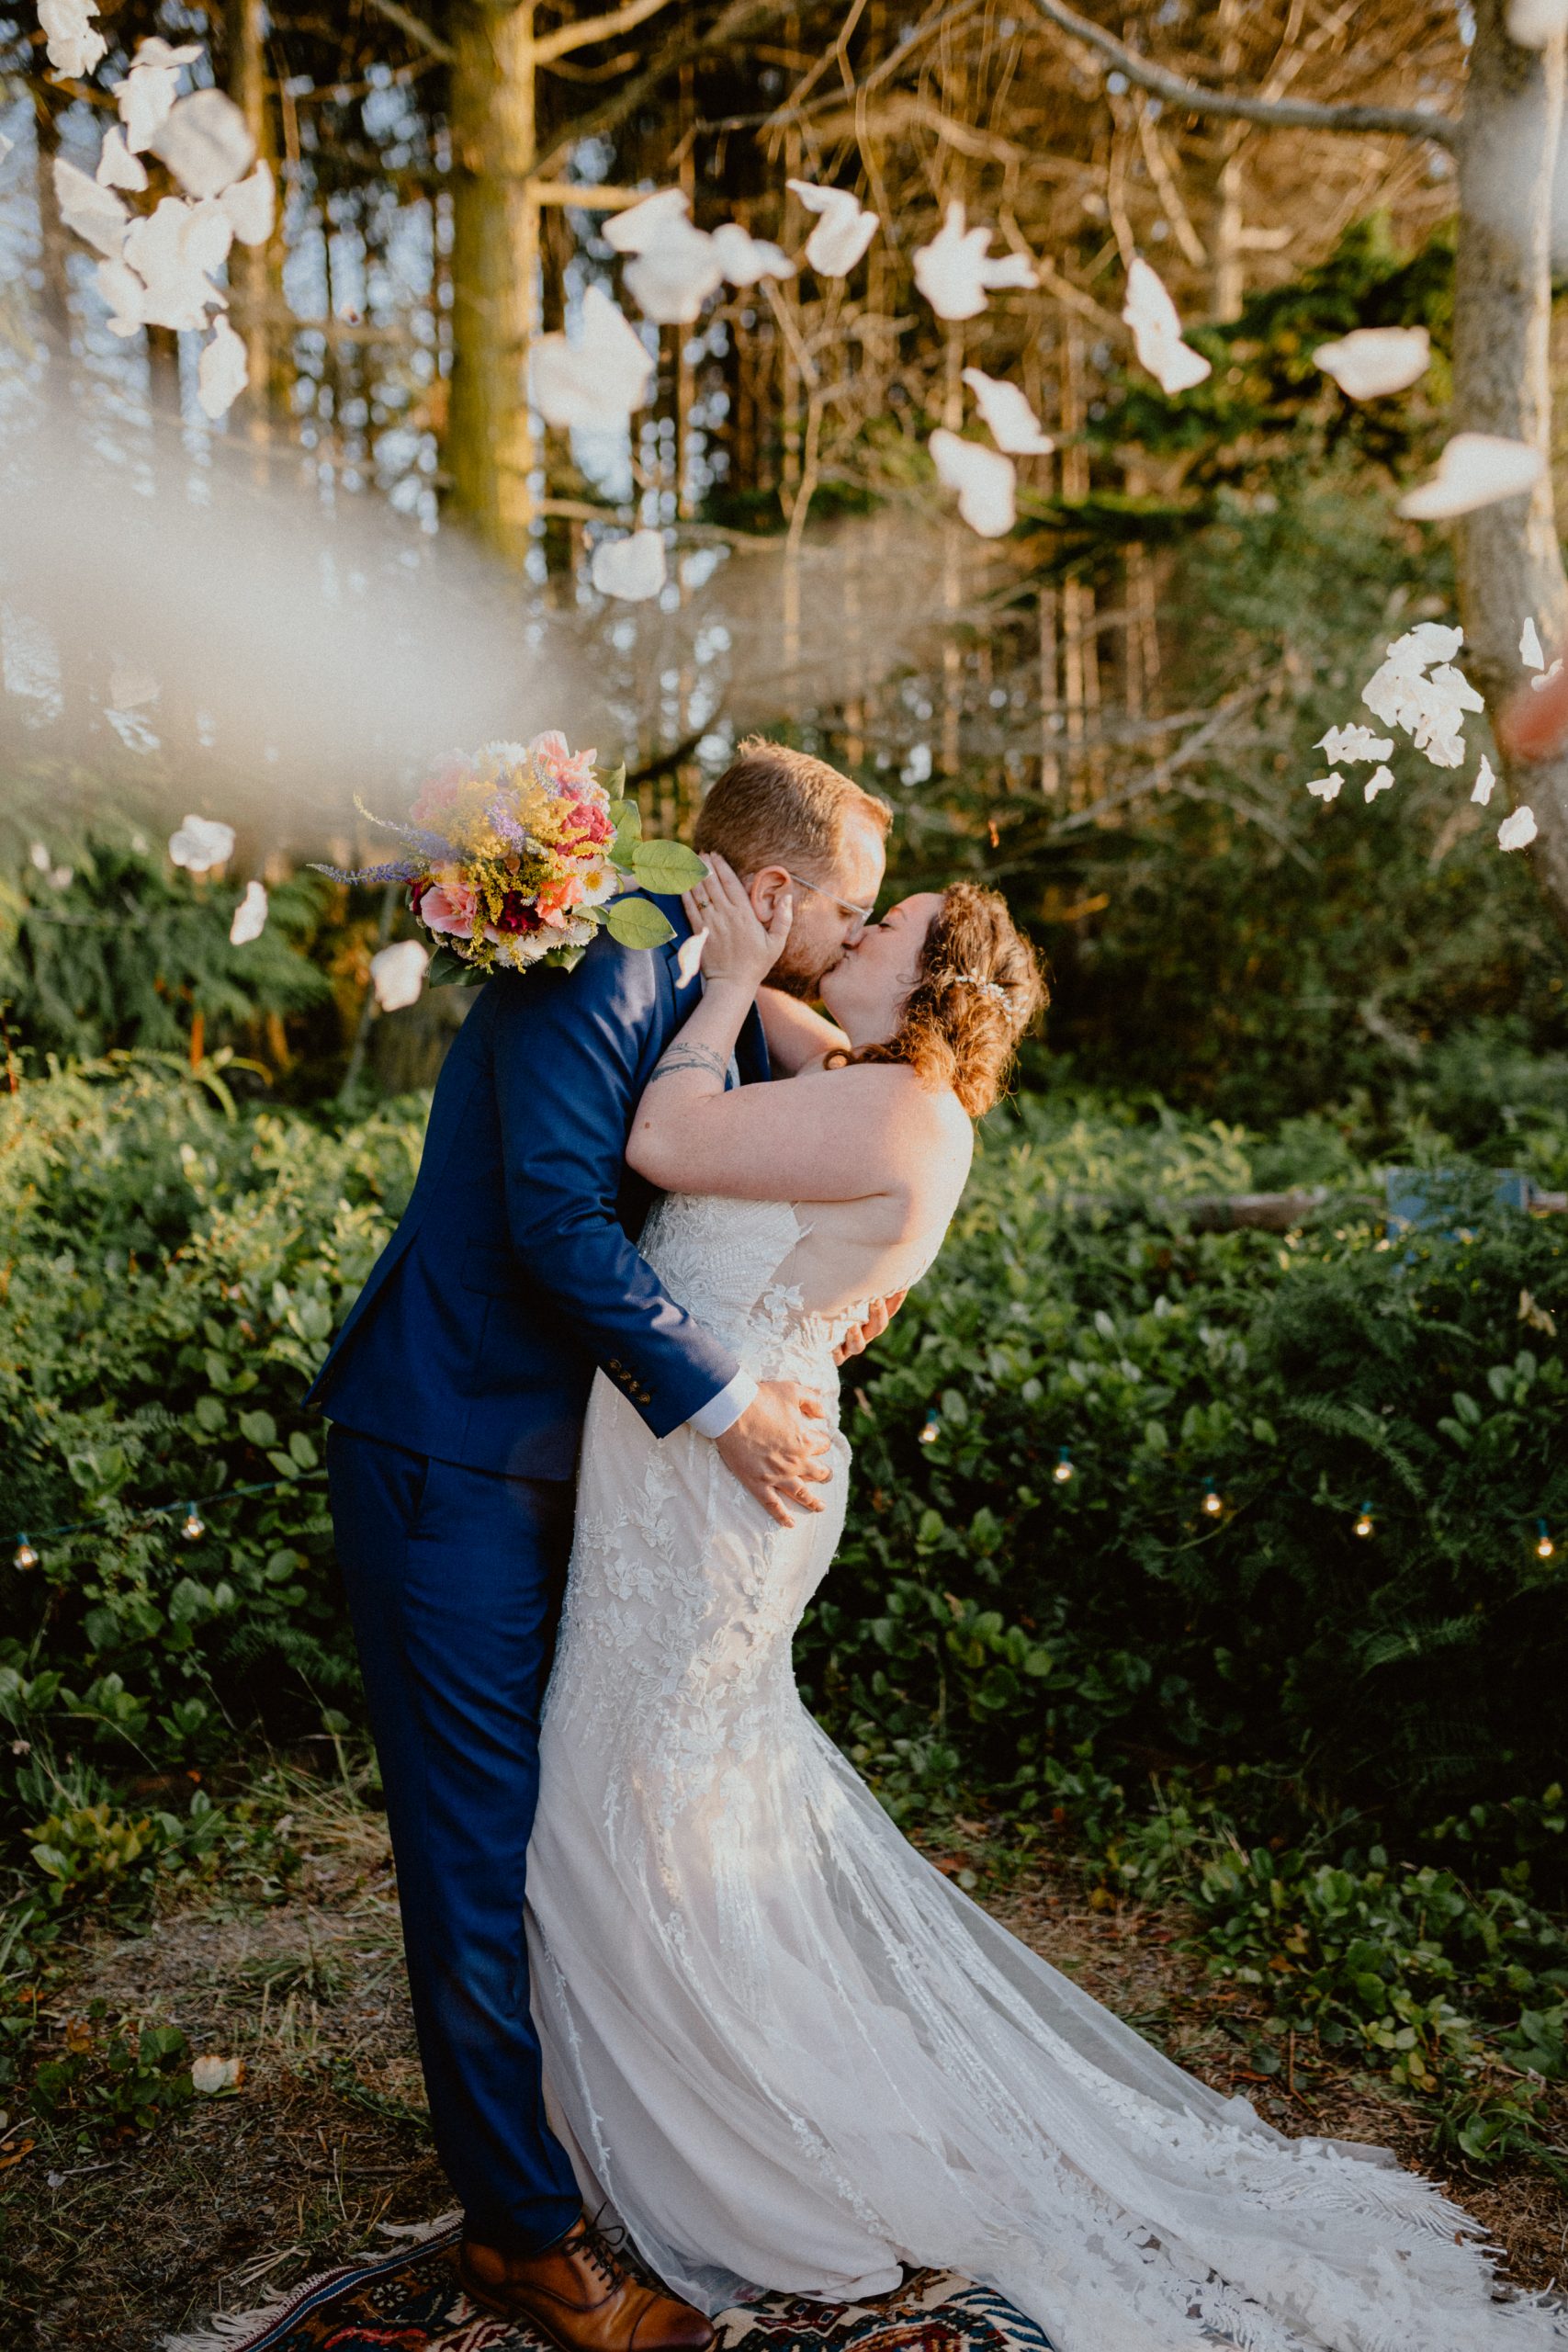 Bride and Groom embrace in a kiss with flower petals falling around them in an outdoor wedding ceremony | Washington State Elopement Photographer, Seattle Elopement Photographer, Newlywed Elopement Photographer, Quarantine Wedding Elopement Inspiration | chelseaabril.com